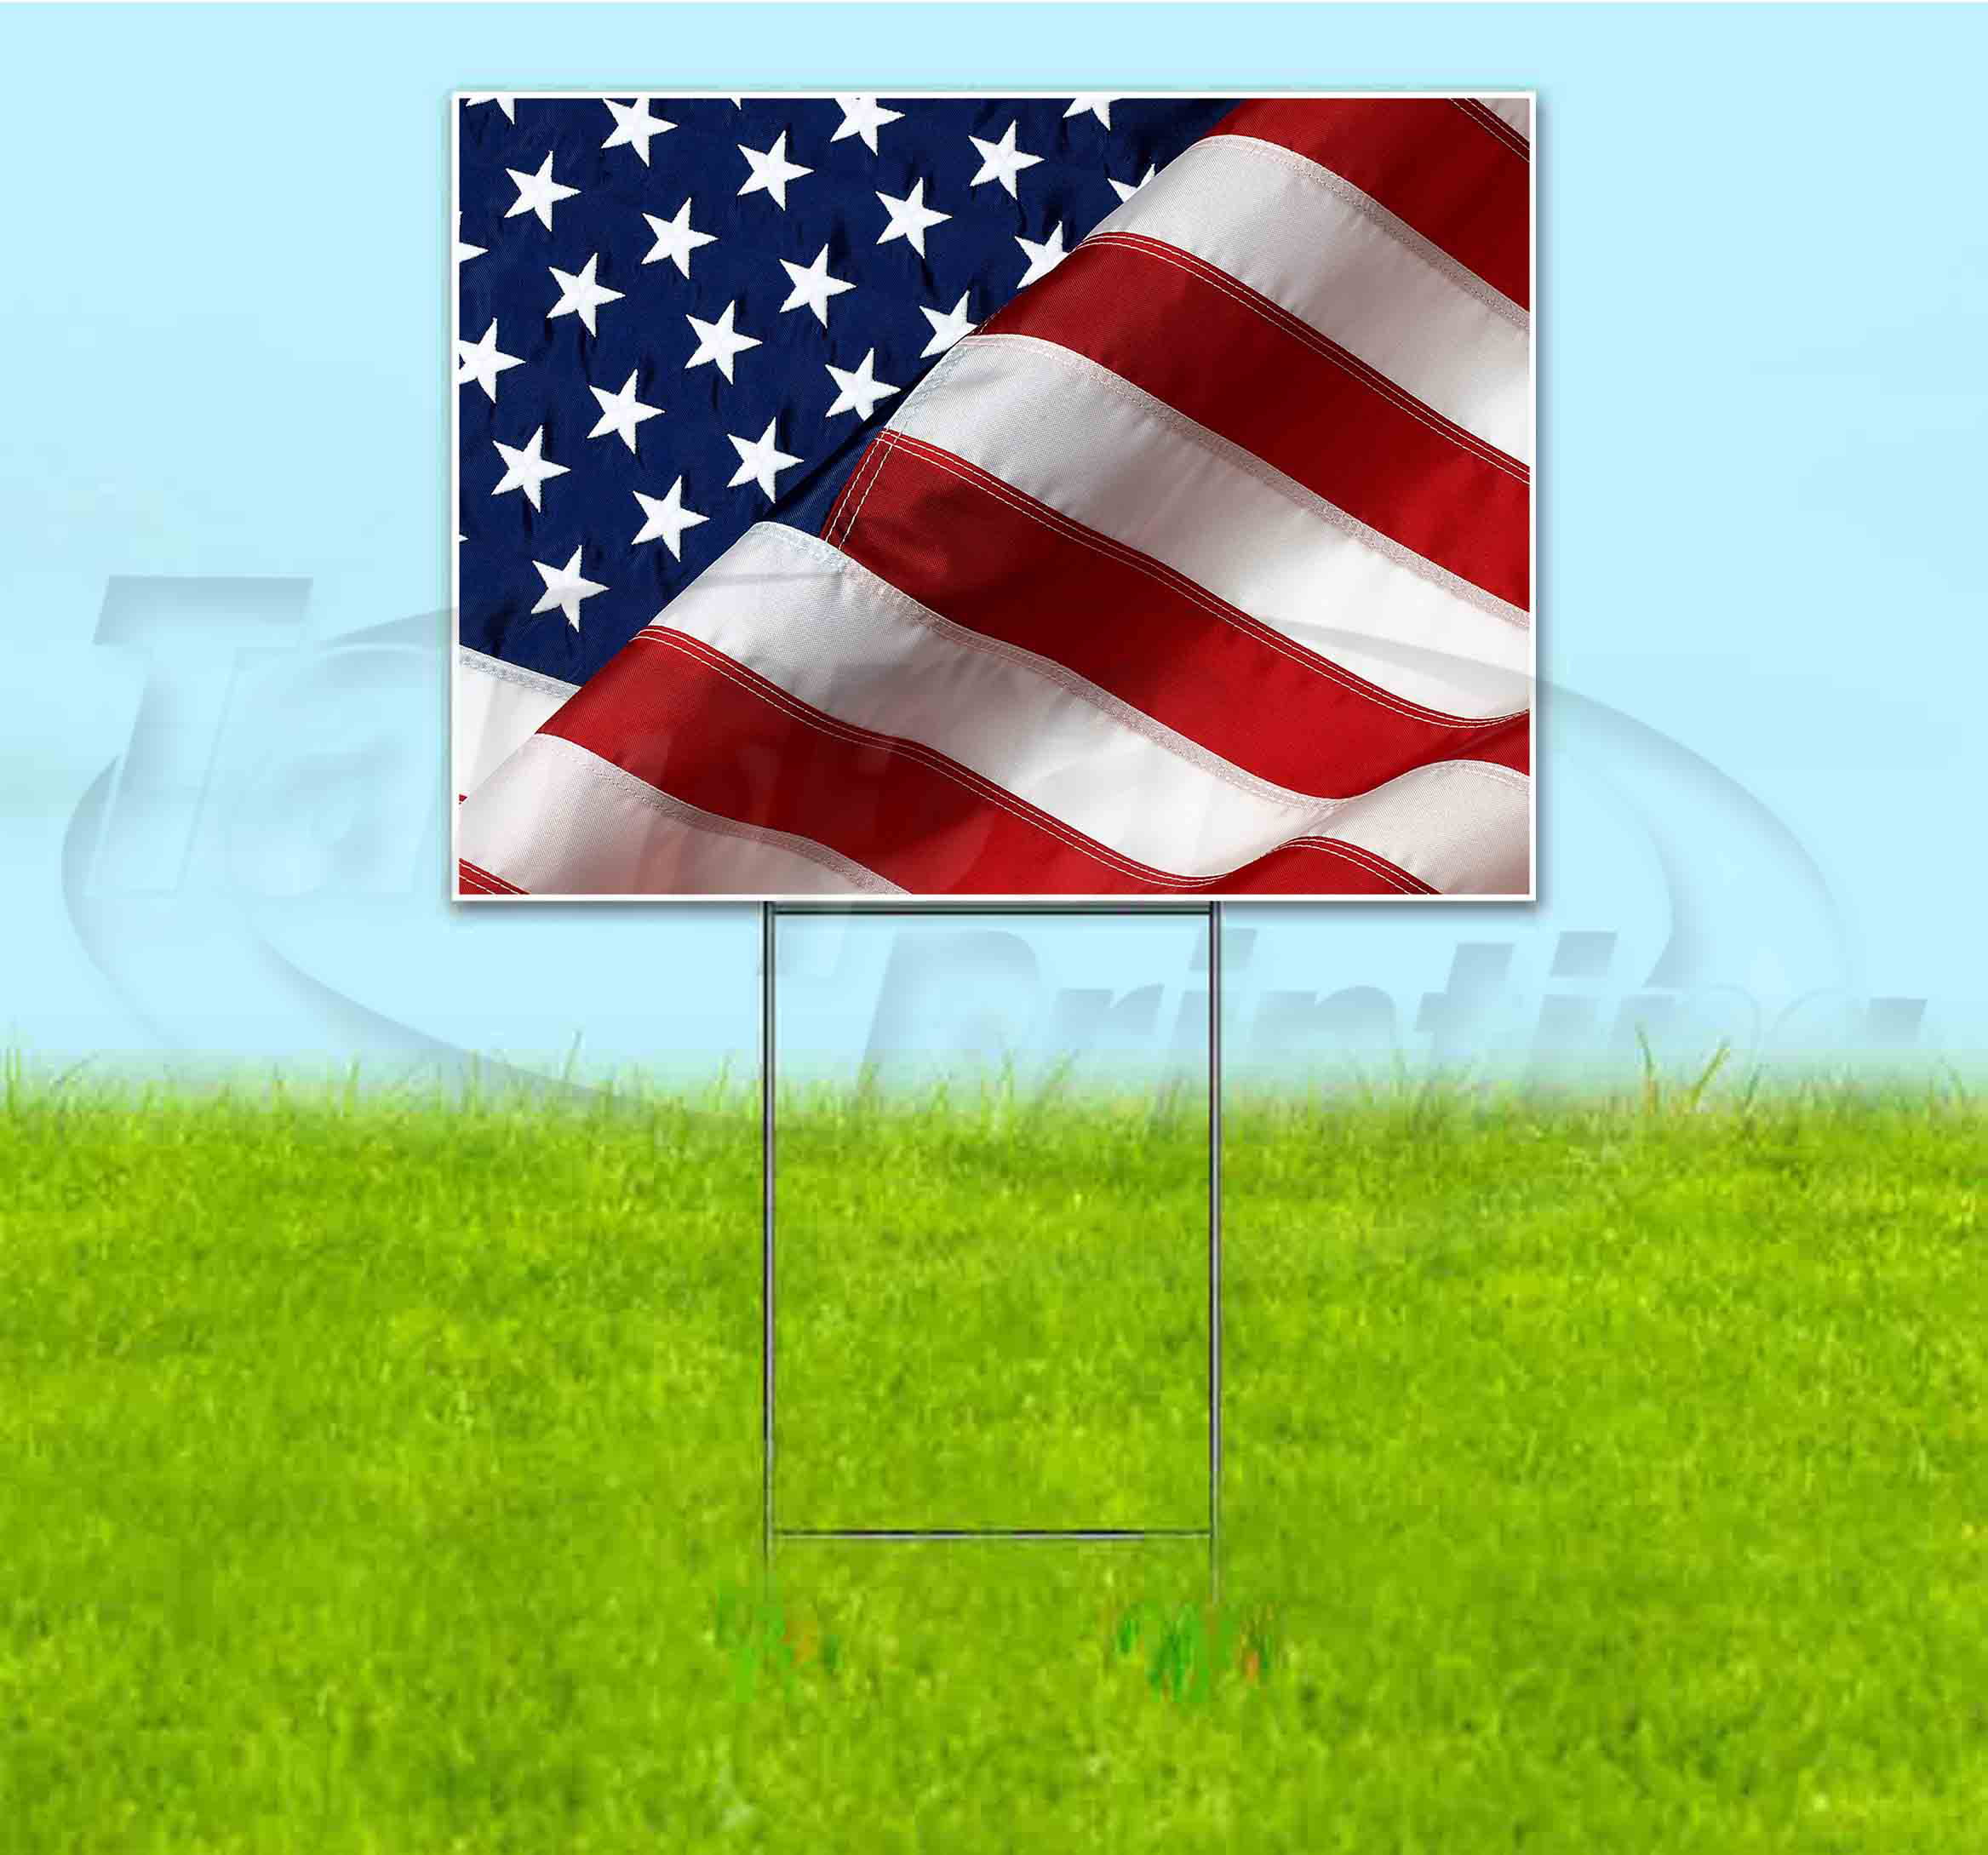 10pk of 18"x24" Two Sided Yard Signs with Stepstakes USA 1776 Betsy Ross Flag 